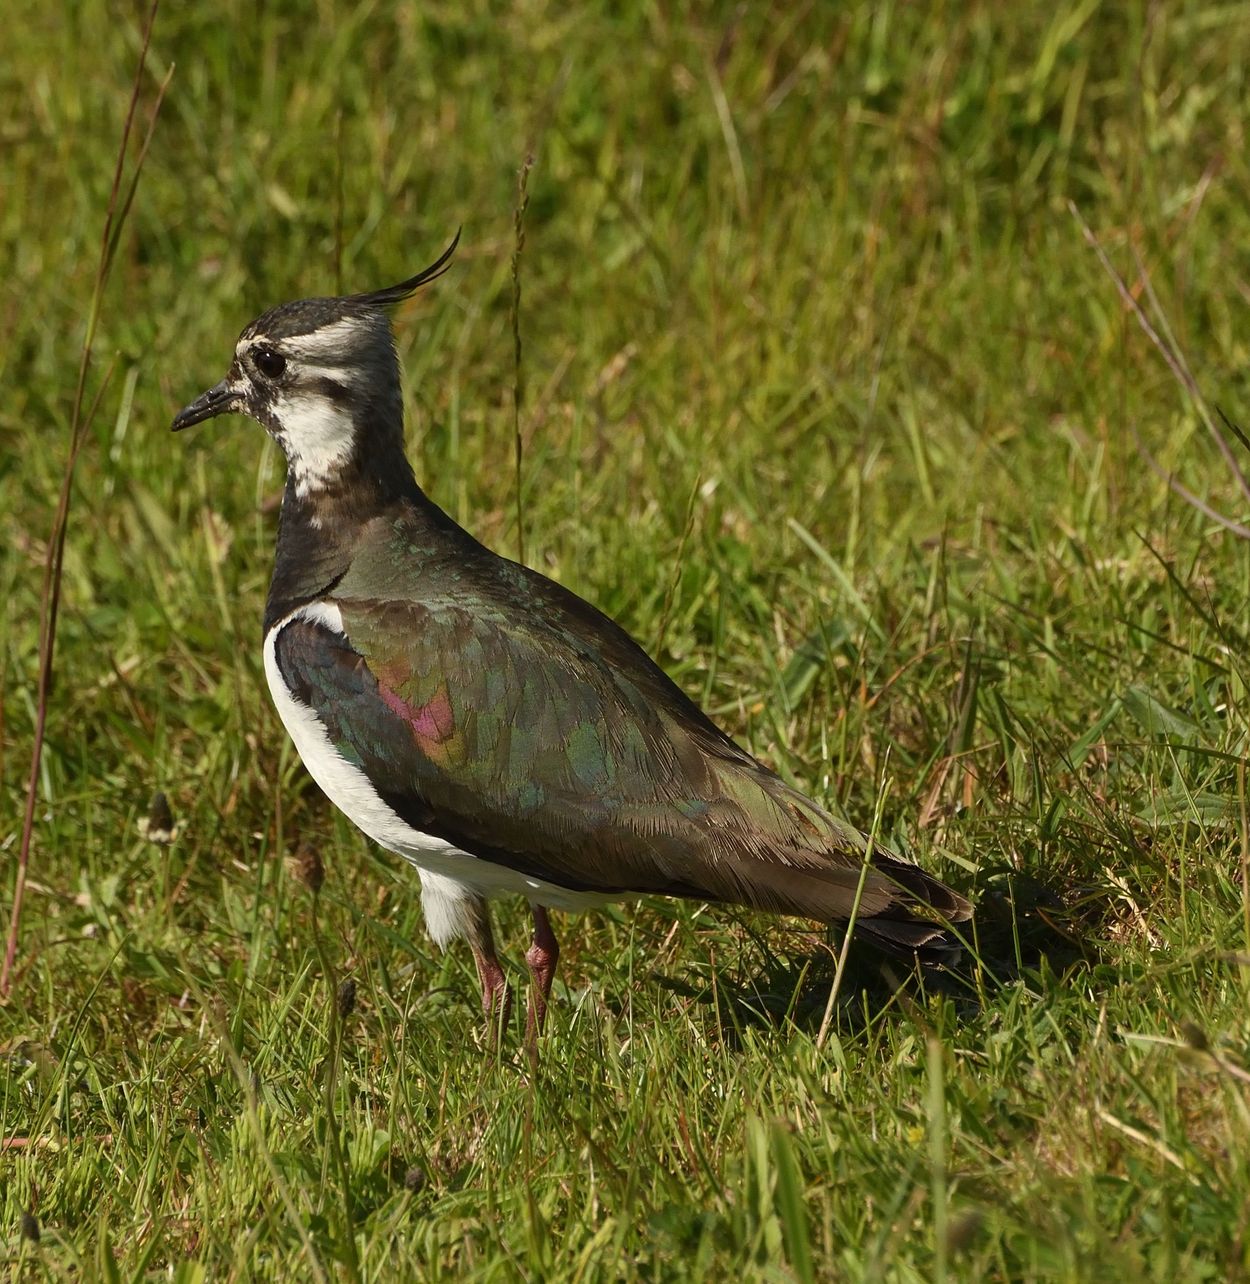 A lapwing in close-up